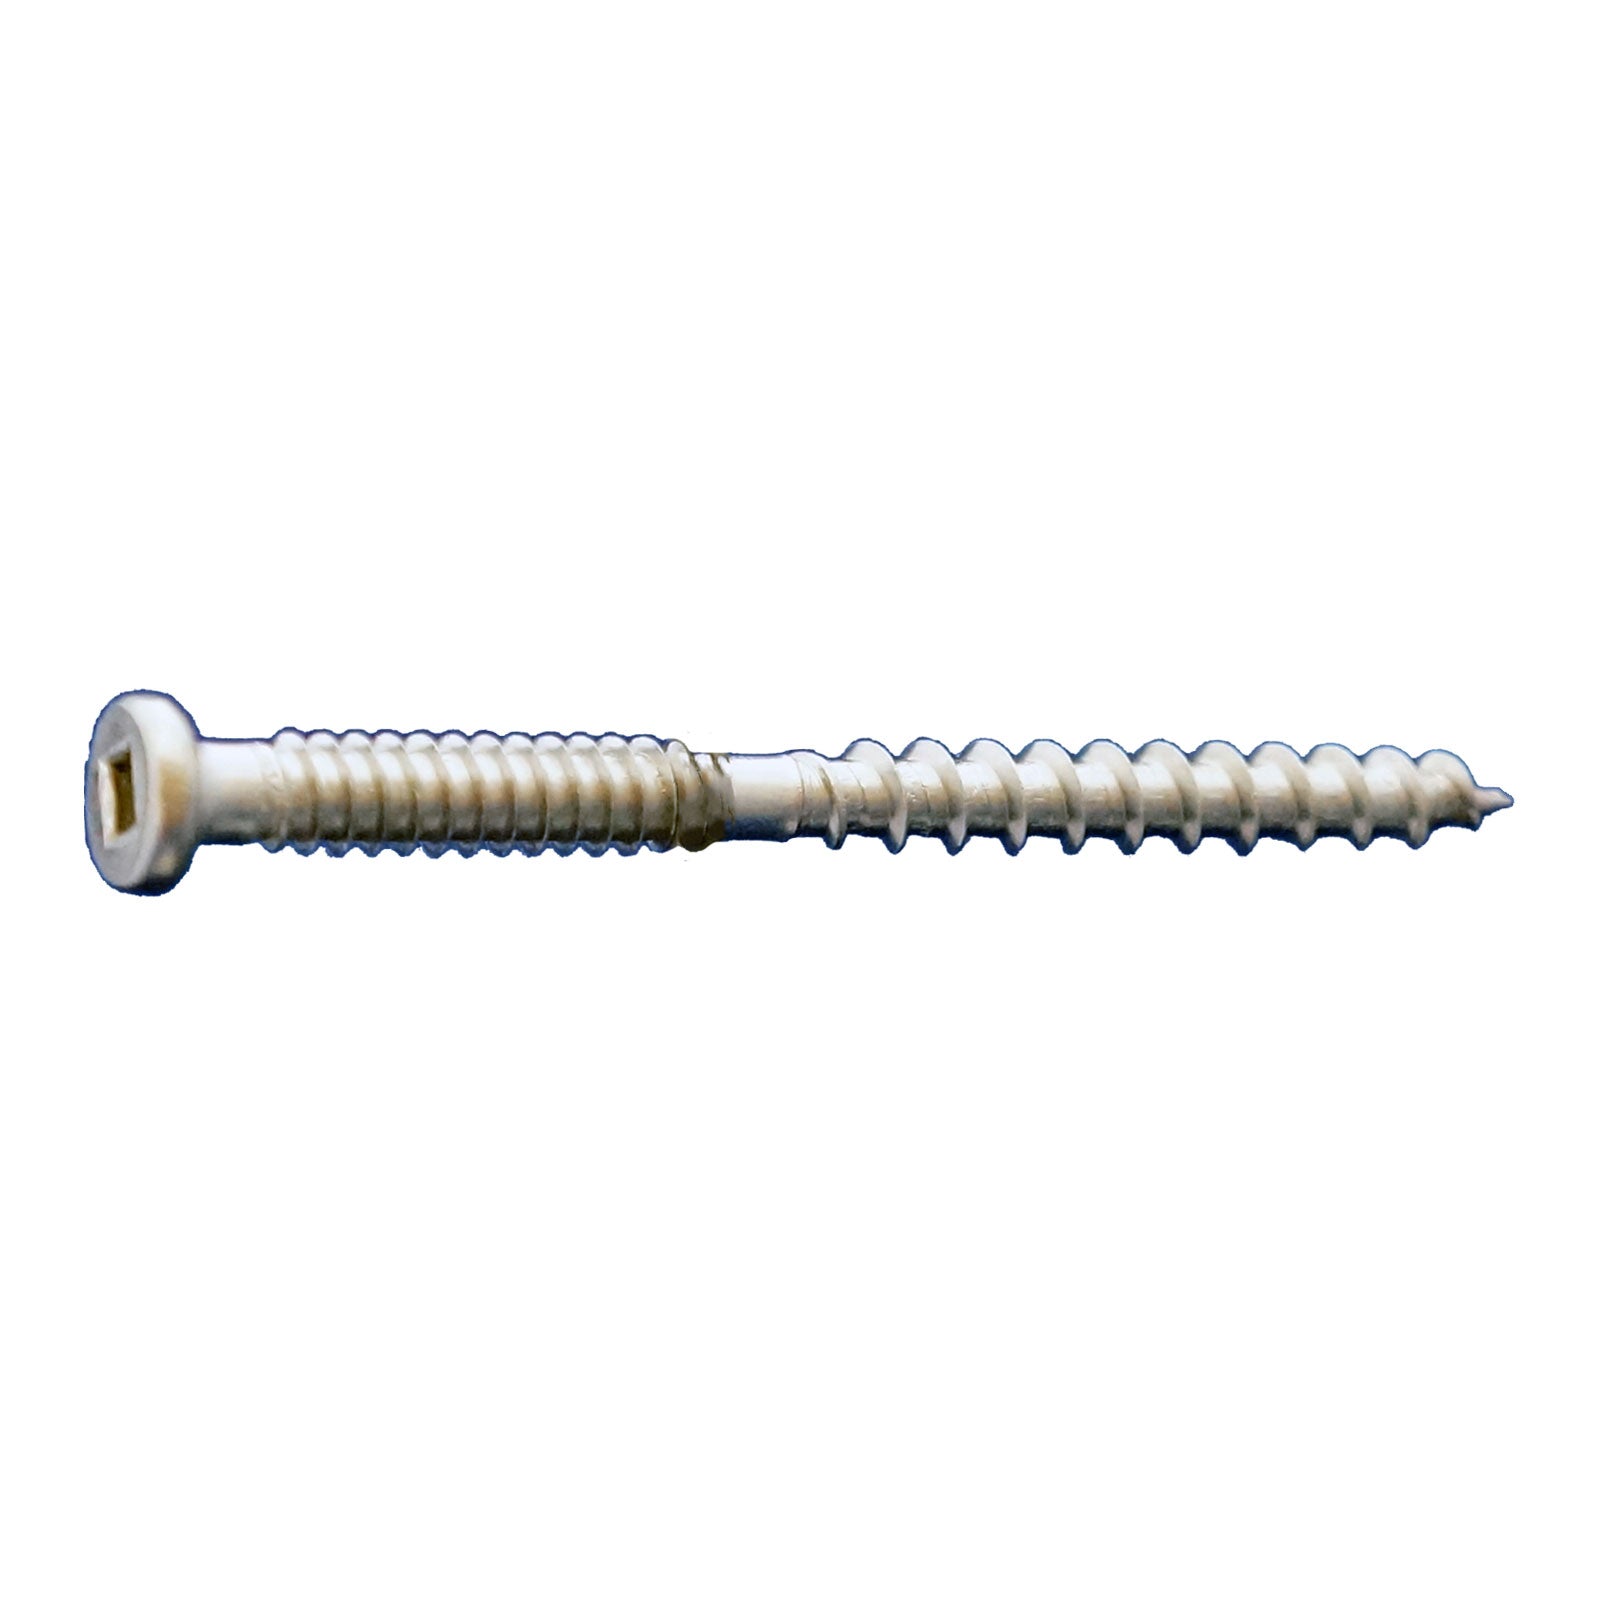 #10 x 2-1/2" #2 Square Button Head Deck Screw - 305 Stainless Steel, Pkg 2000